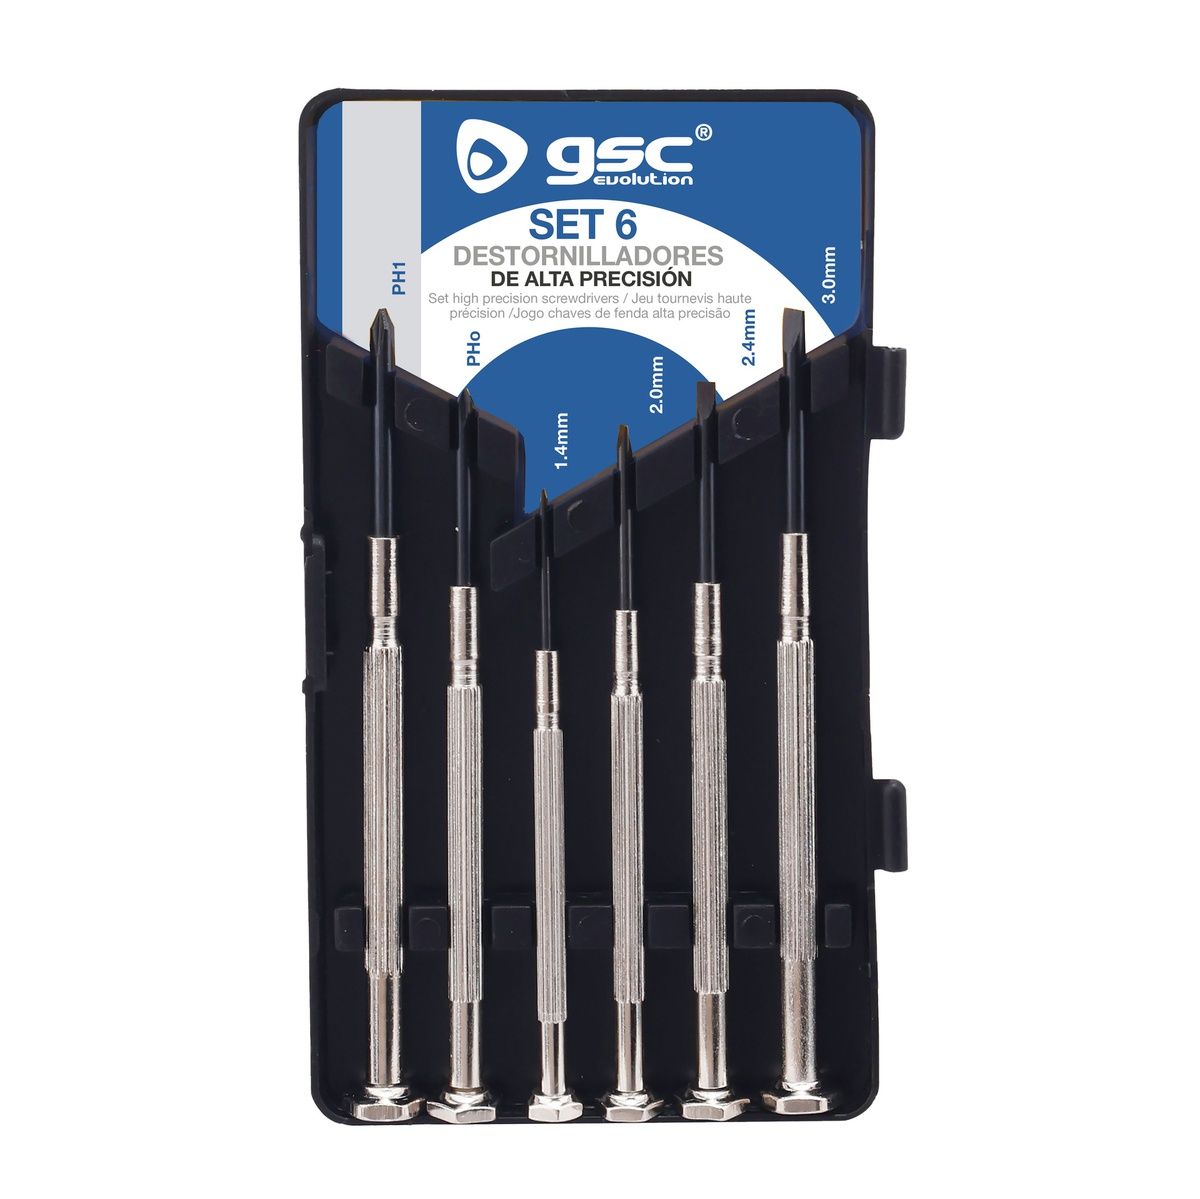 Set of 6 high precision screwdrivers - 4 flat and 2 Philips